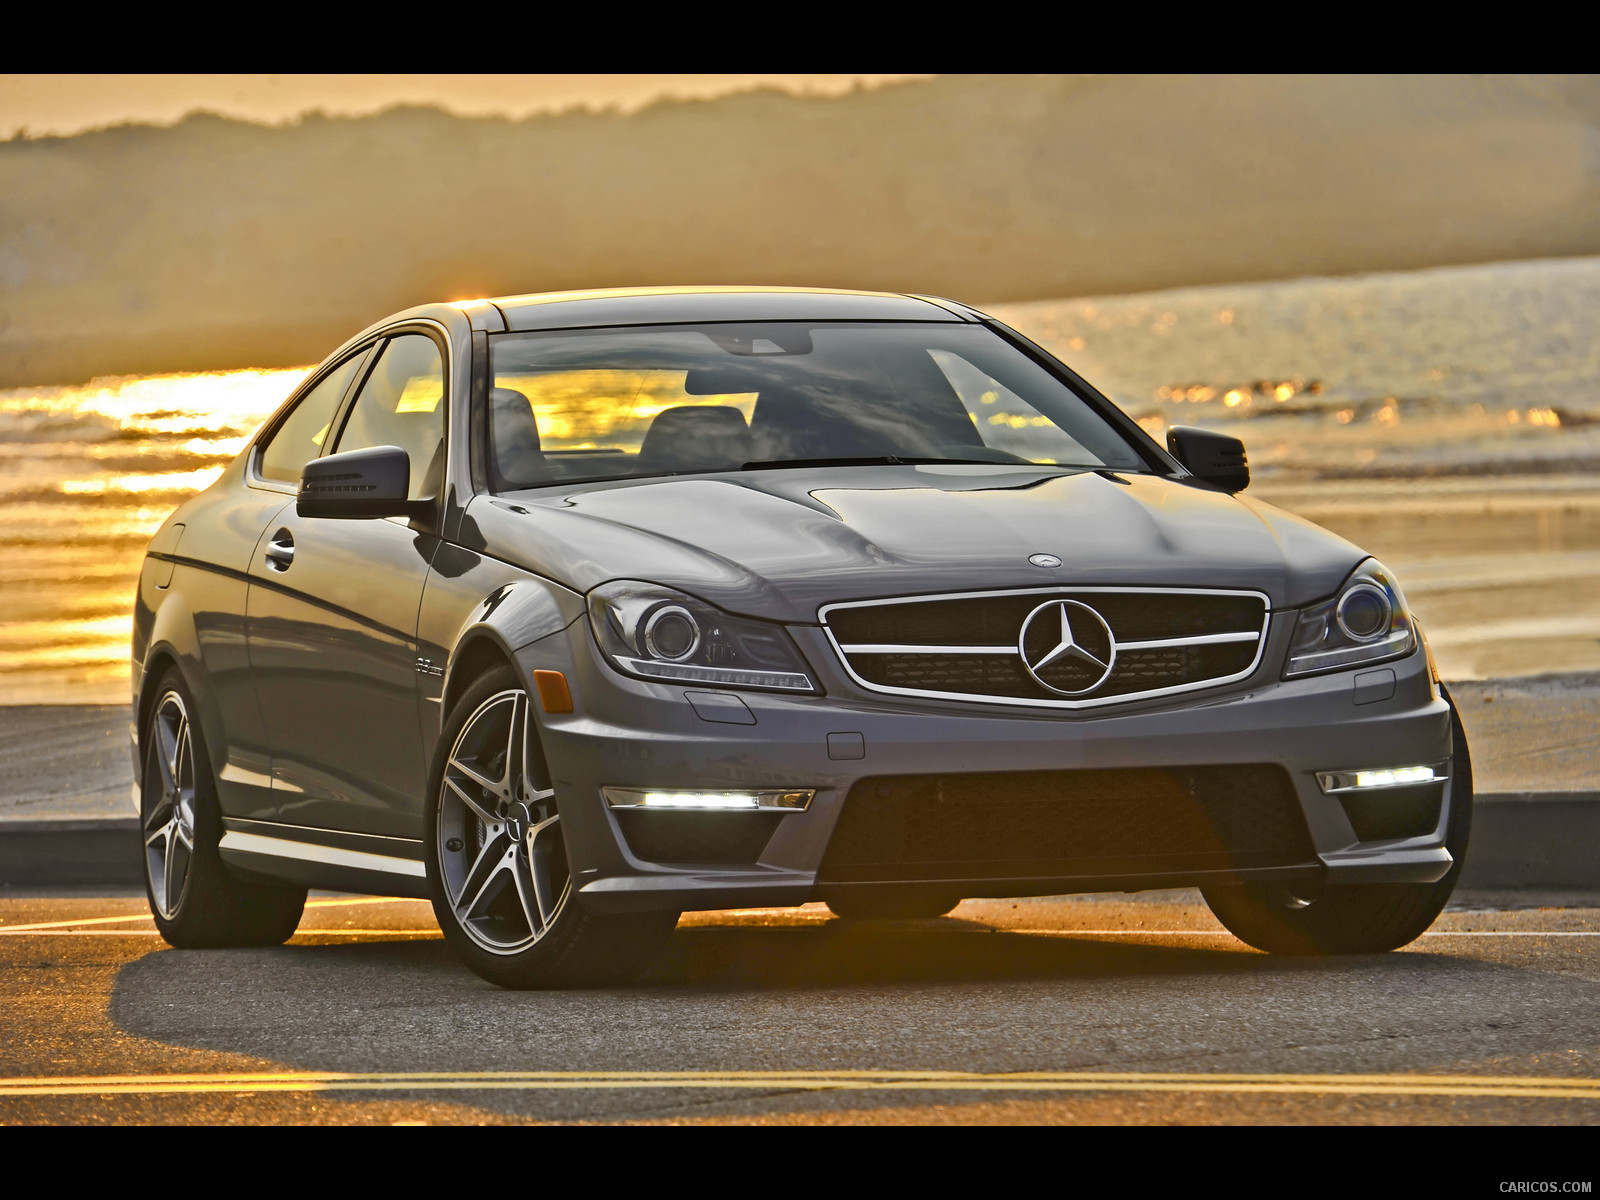 Mercedes-Benz C63 AMG Coupe (2012) with MCT transmission - , #16 of 64